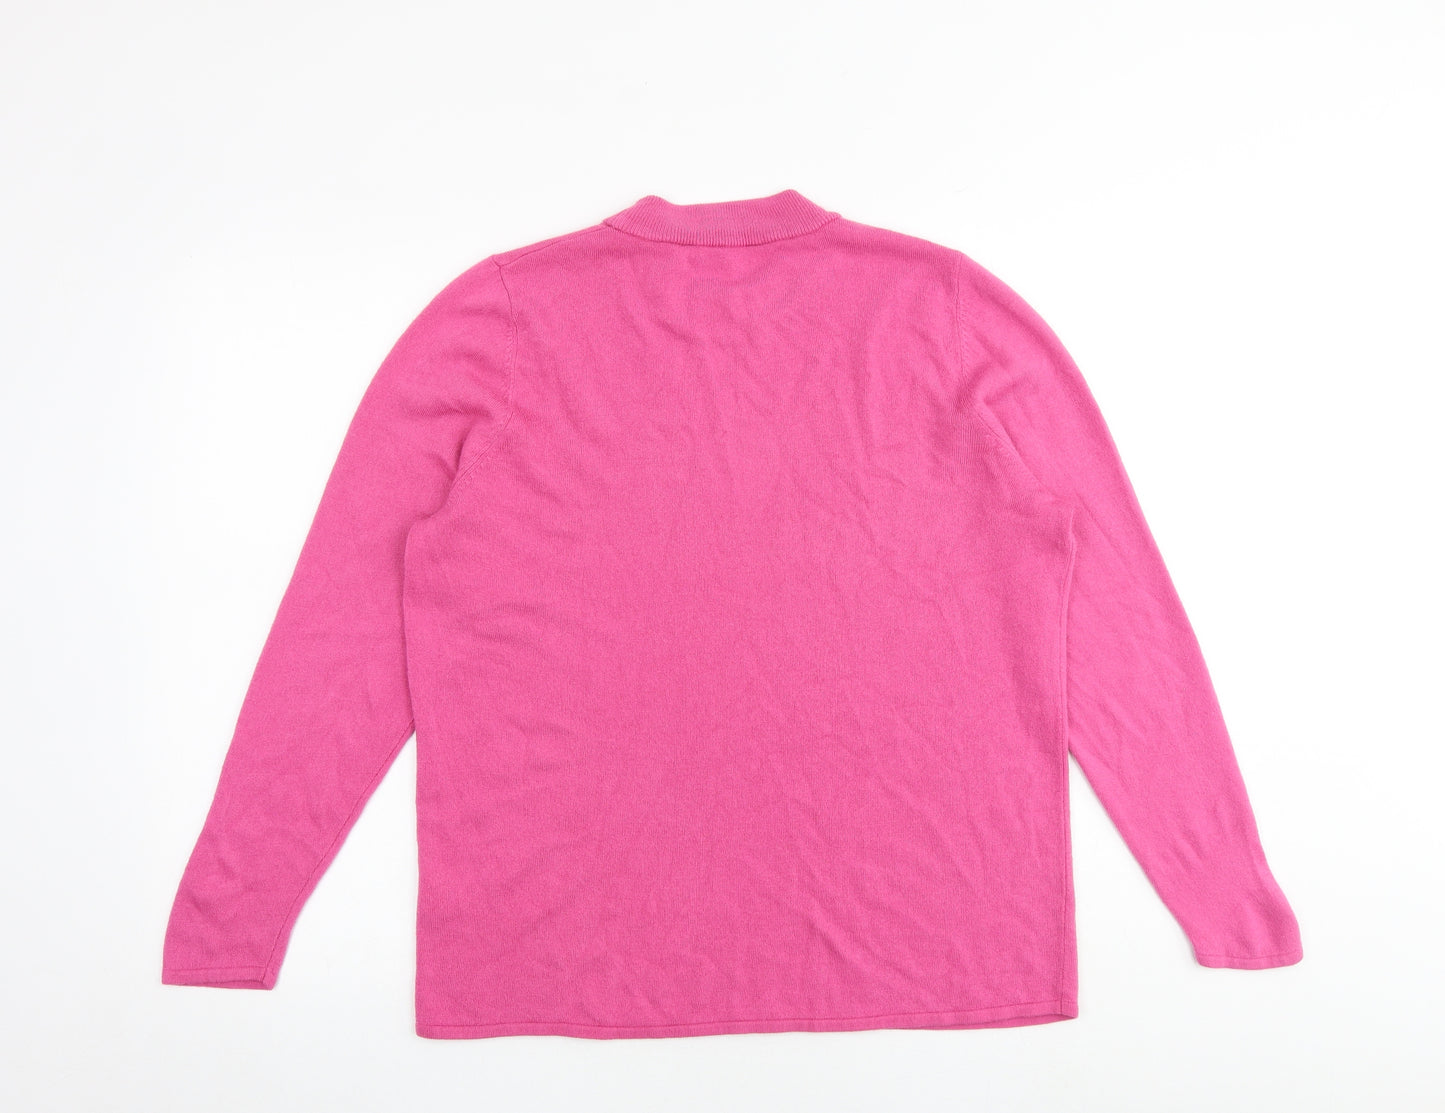 Bonmarché Womens Pink Round Neck Acrylic Pullover Jumper Size 18